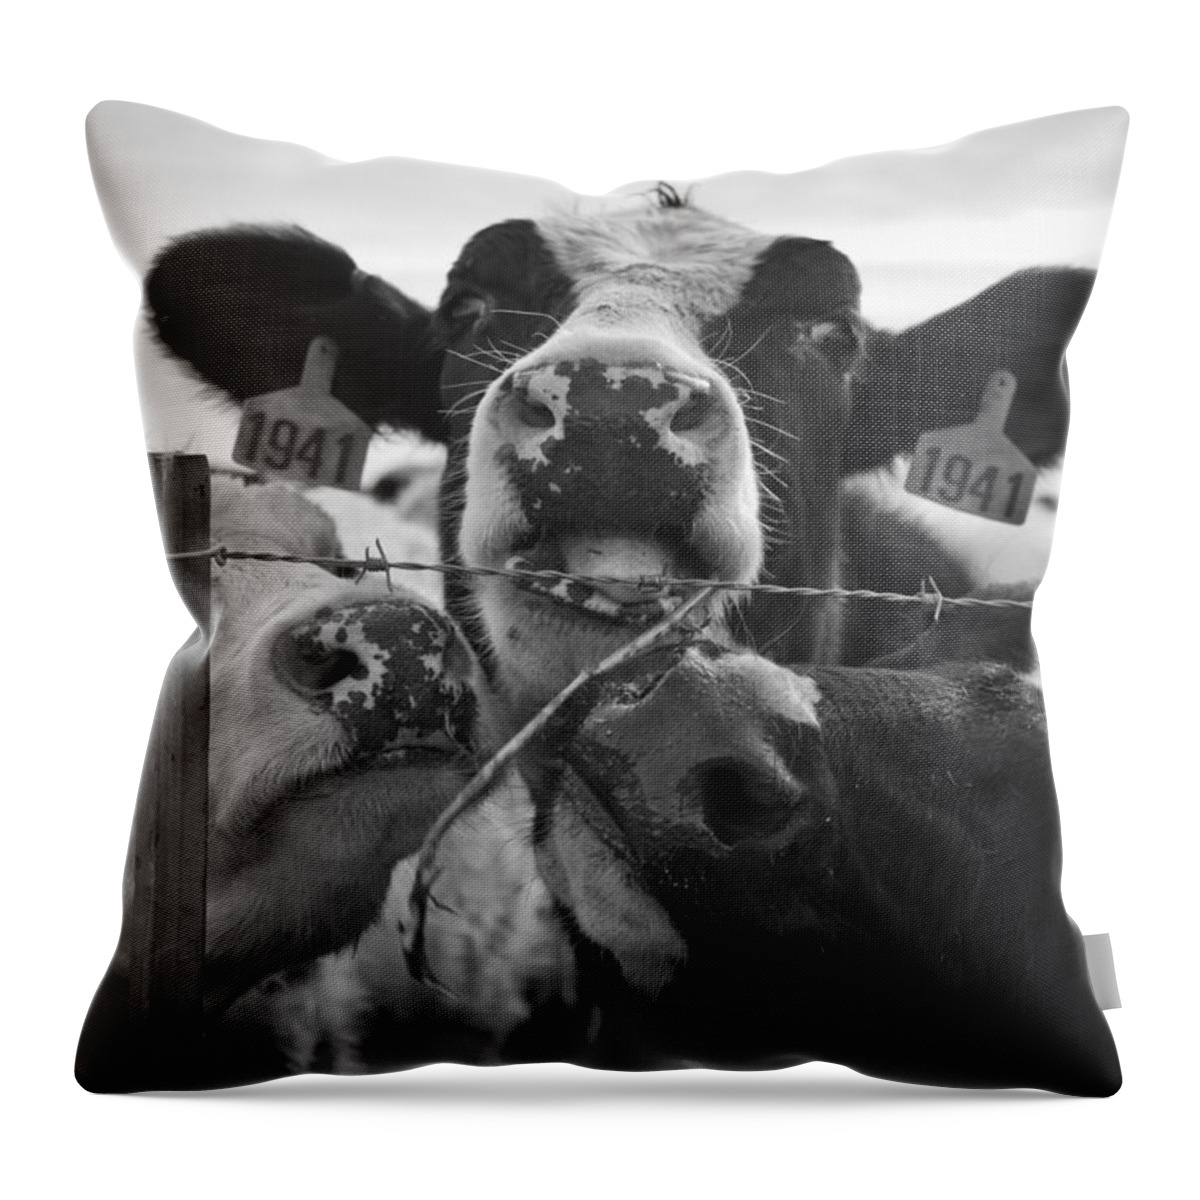 Cow Throw Pillow featuring the photograph The Girls by Priya Ghose